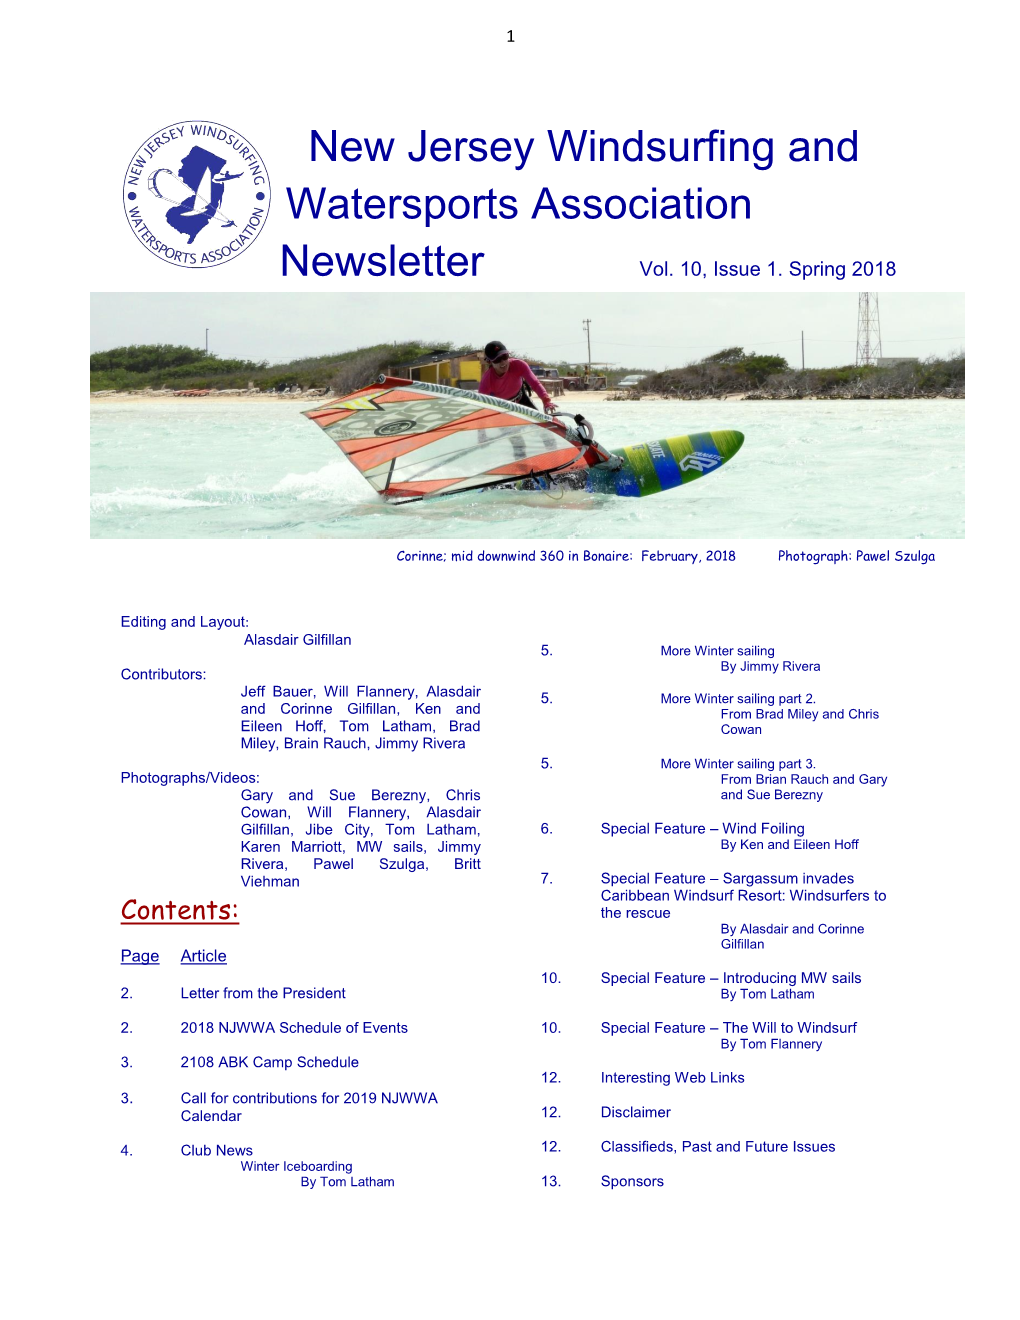 New Jersey Windsurfing and Watersports Association Newsletter